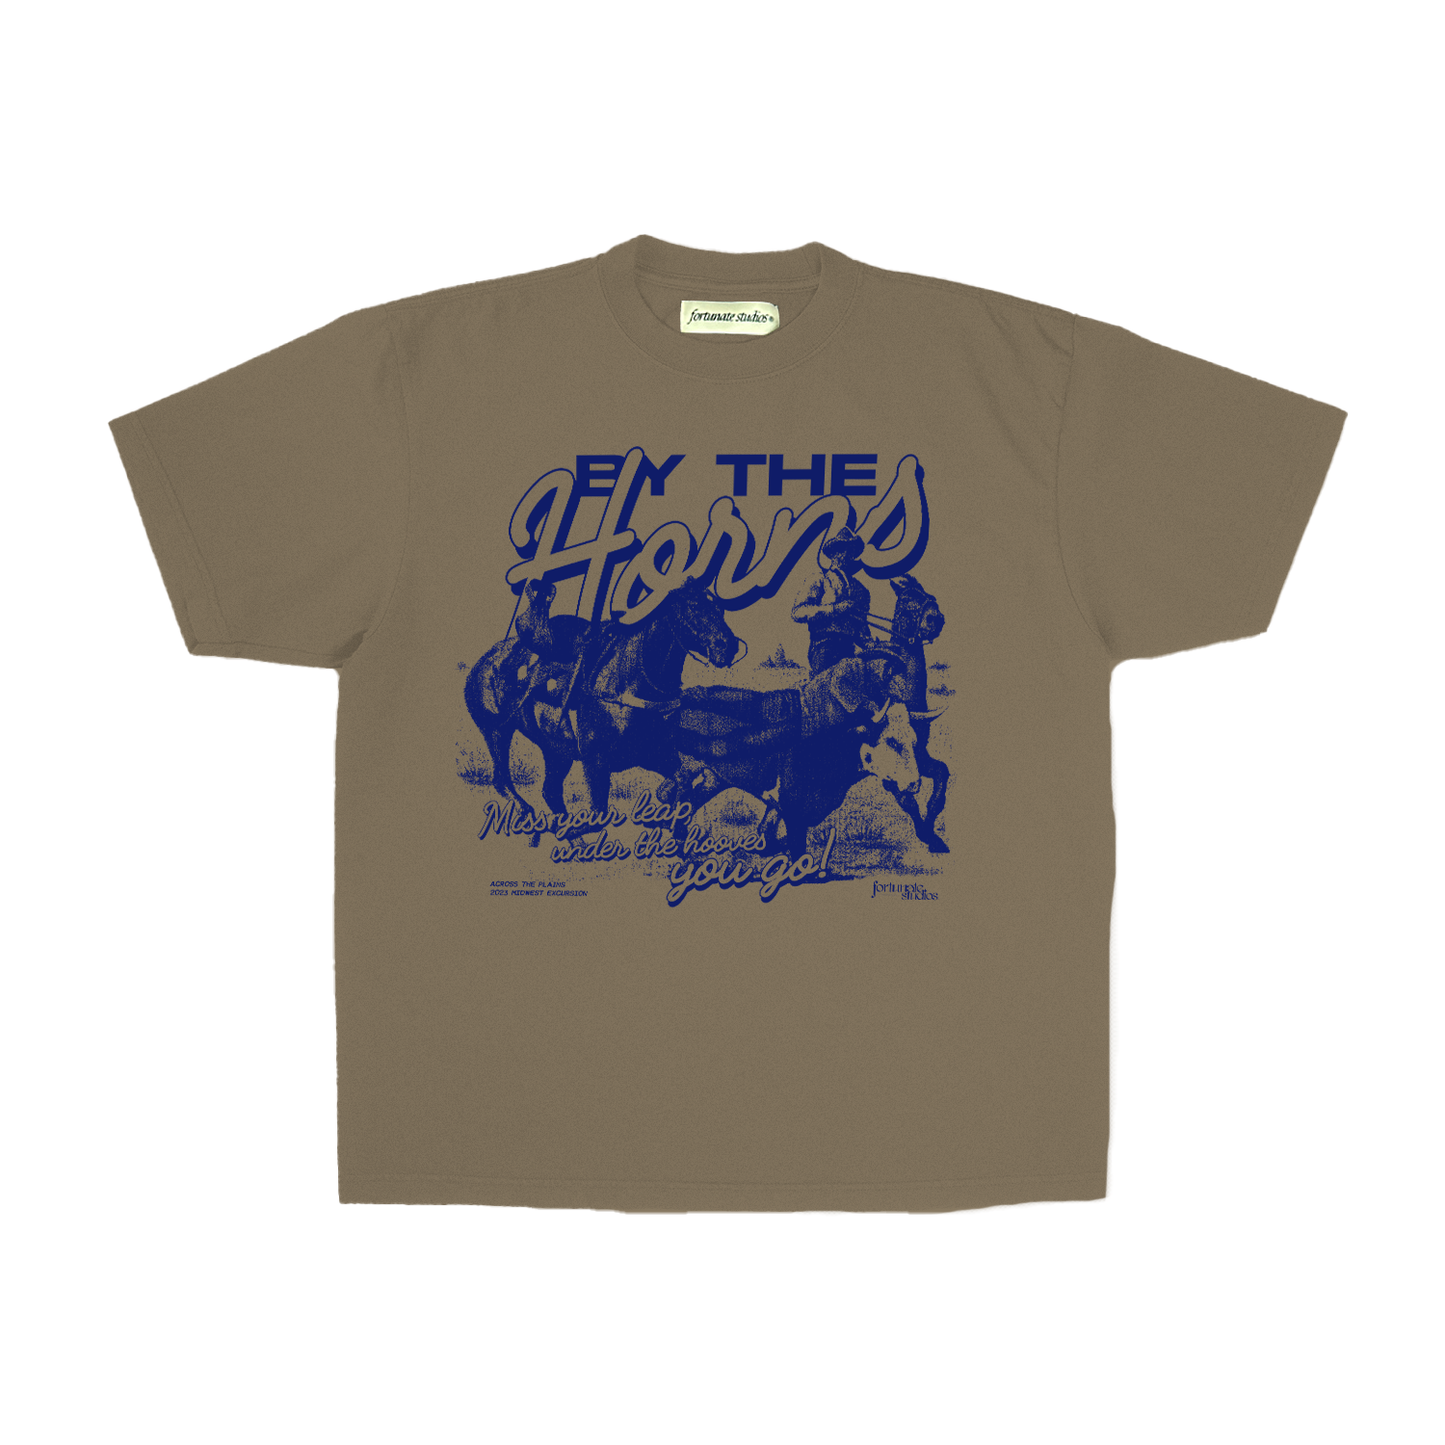 BY THE HORNS Tee (Olive)